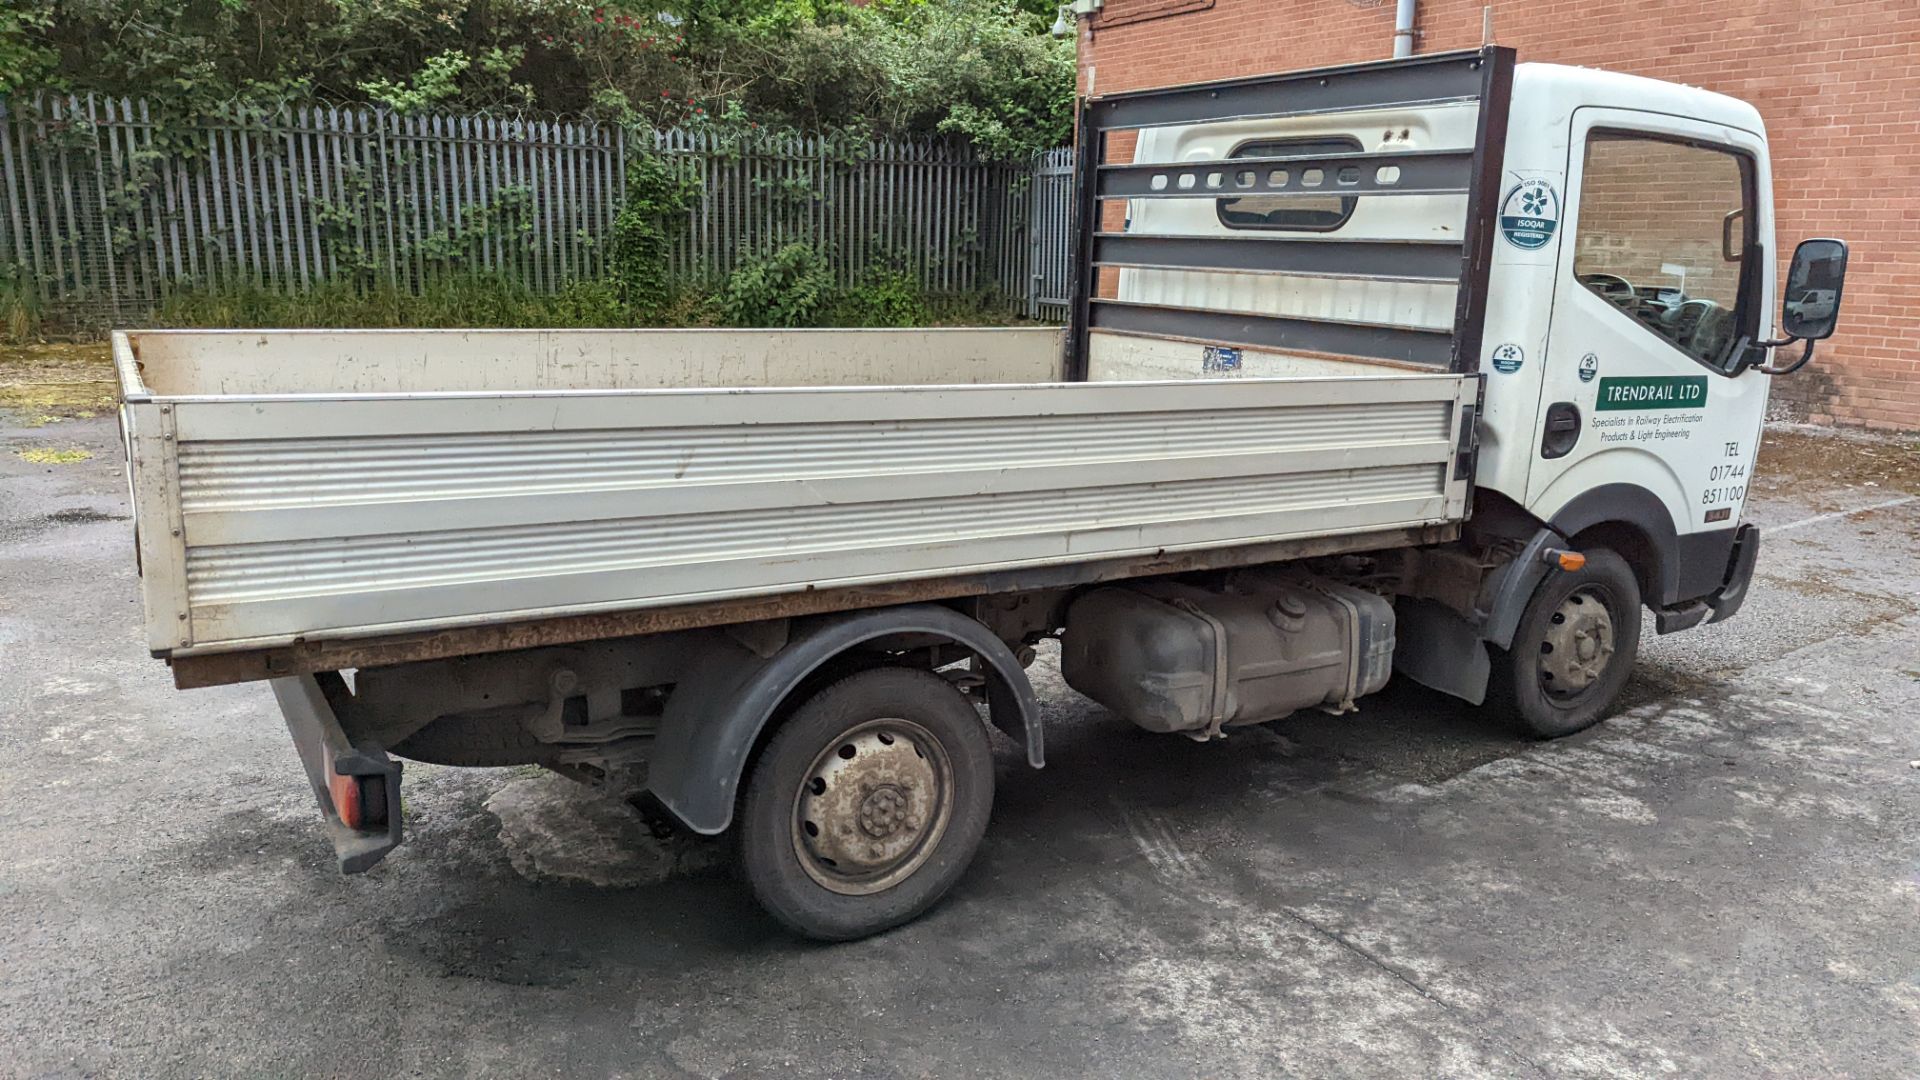 FE57 UVK Nissan Cabstar 34.11 S/C SWB 3.1m dropside, 5 speed manual gearbox, 2488cc diesel engine. - Image 21 of 35